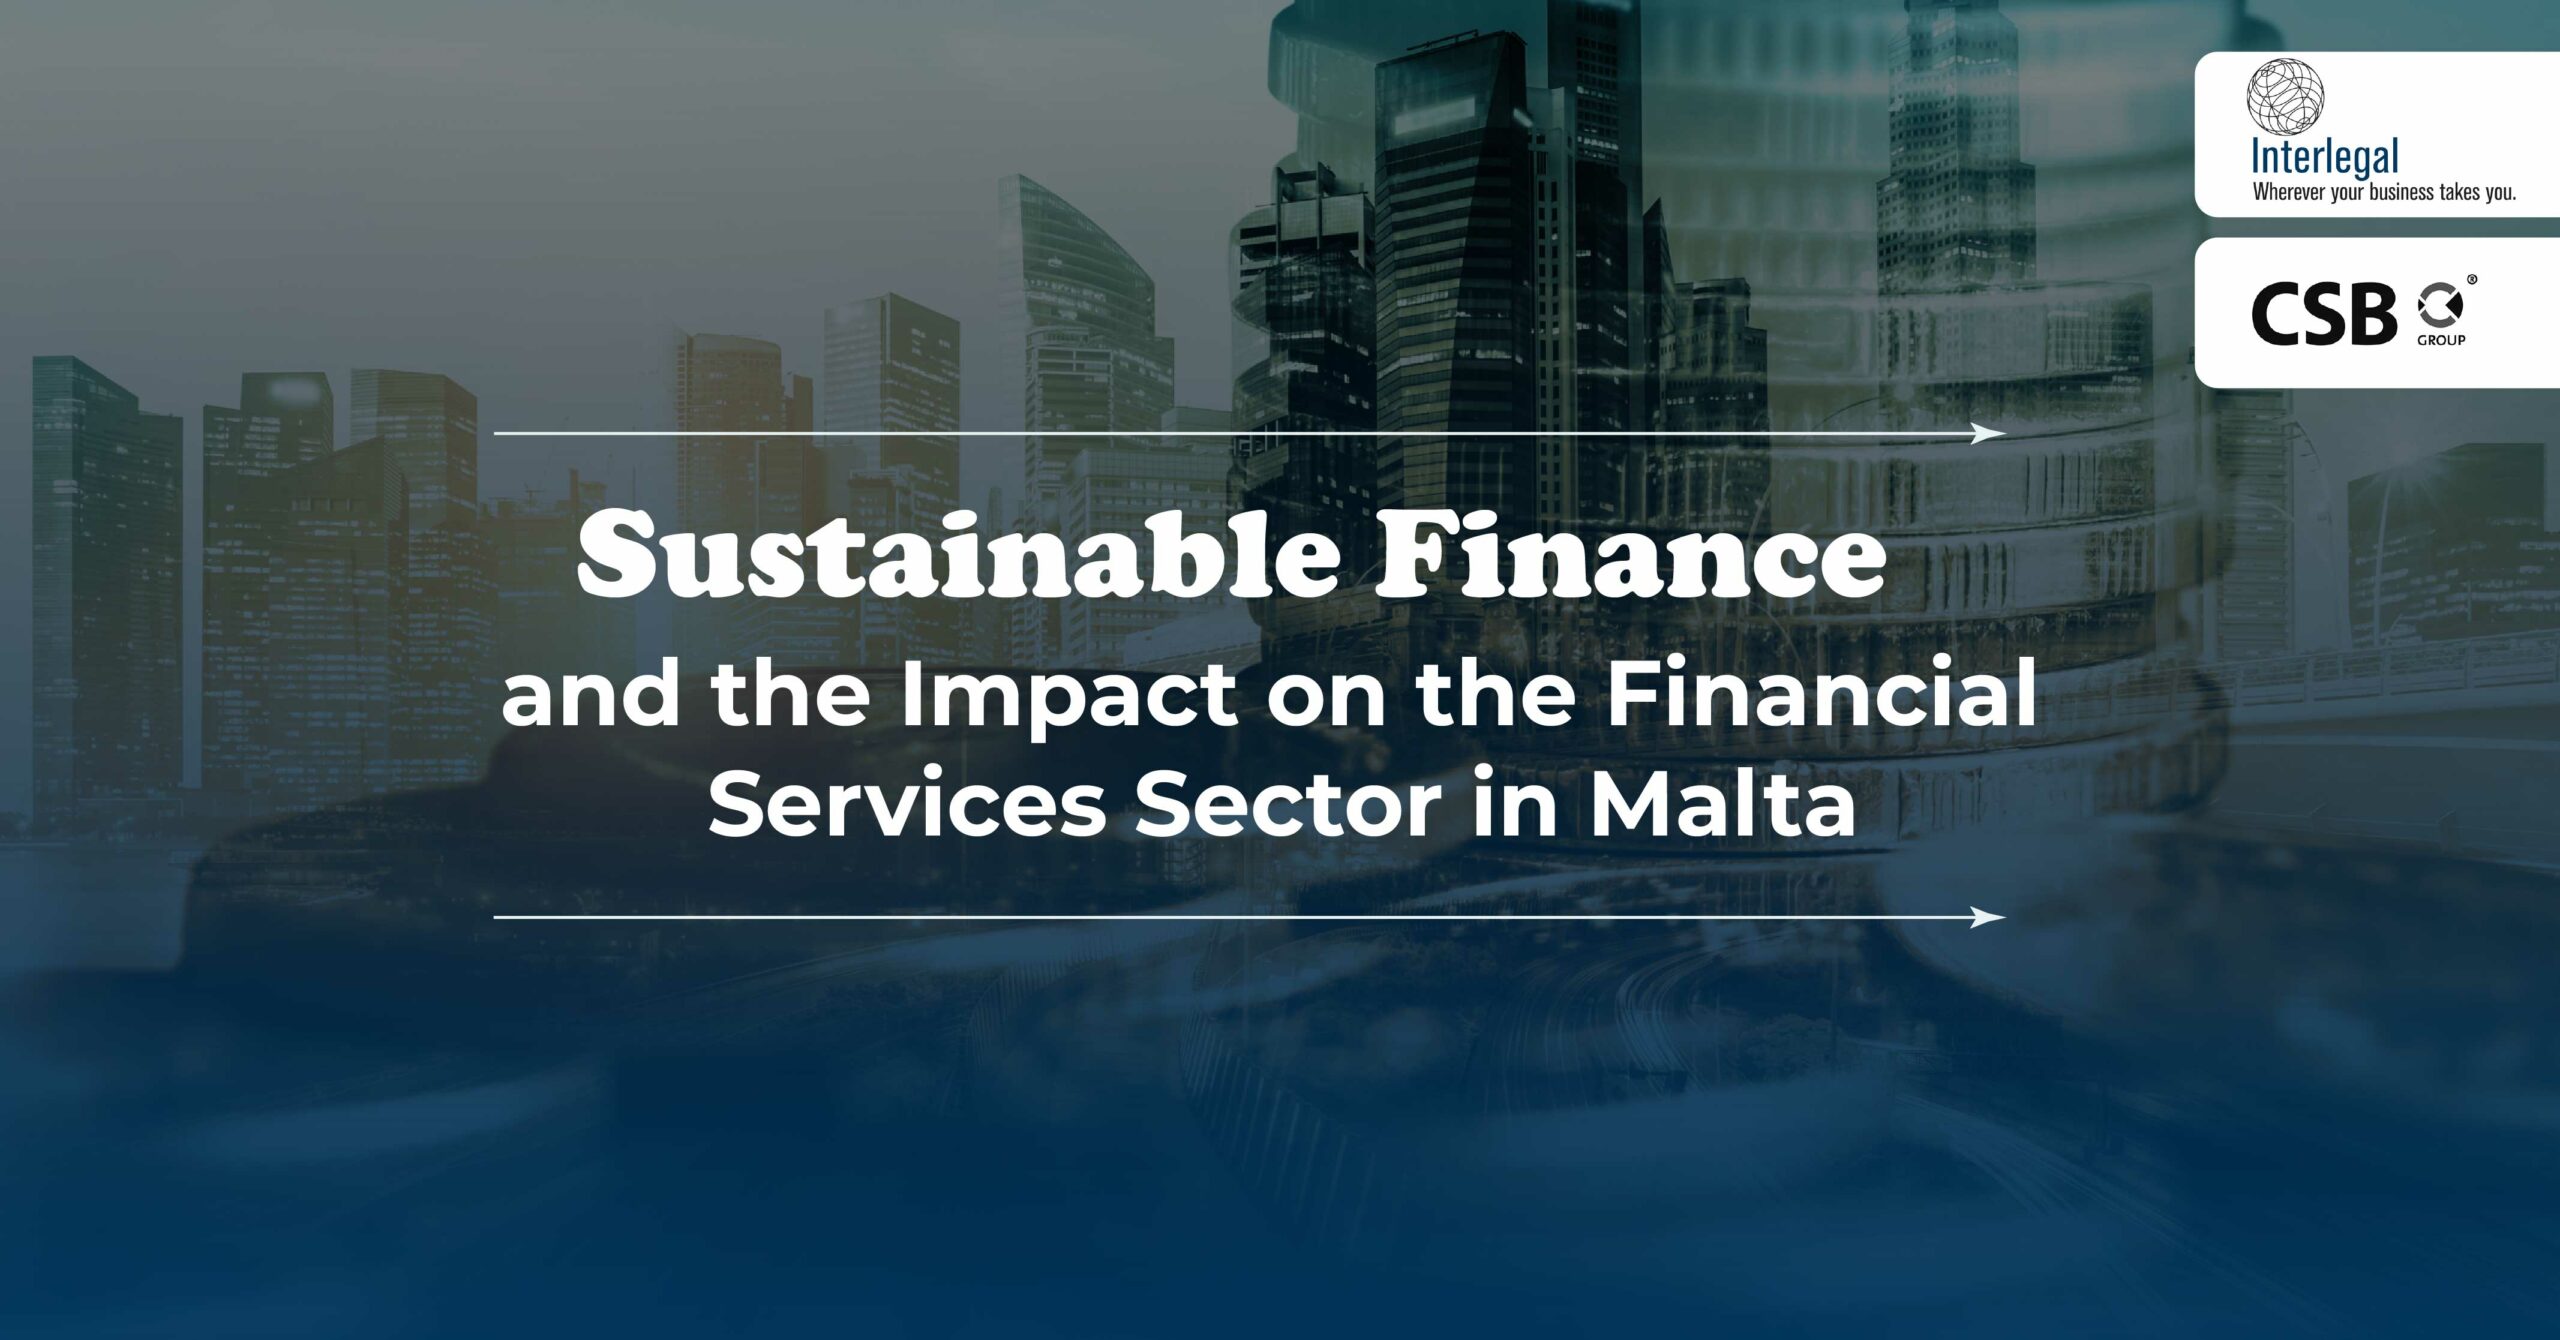 Sustainable Finance and the Impact on the Financial Services Sector in Malta